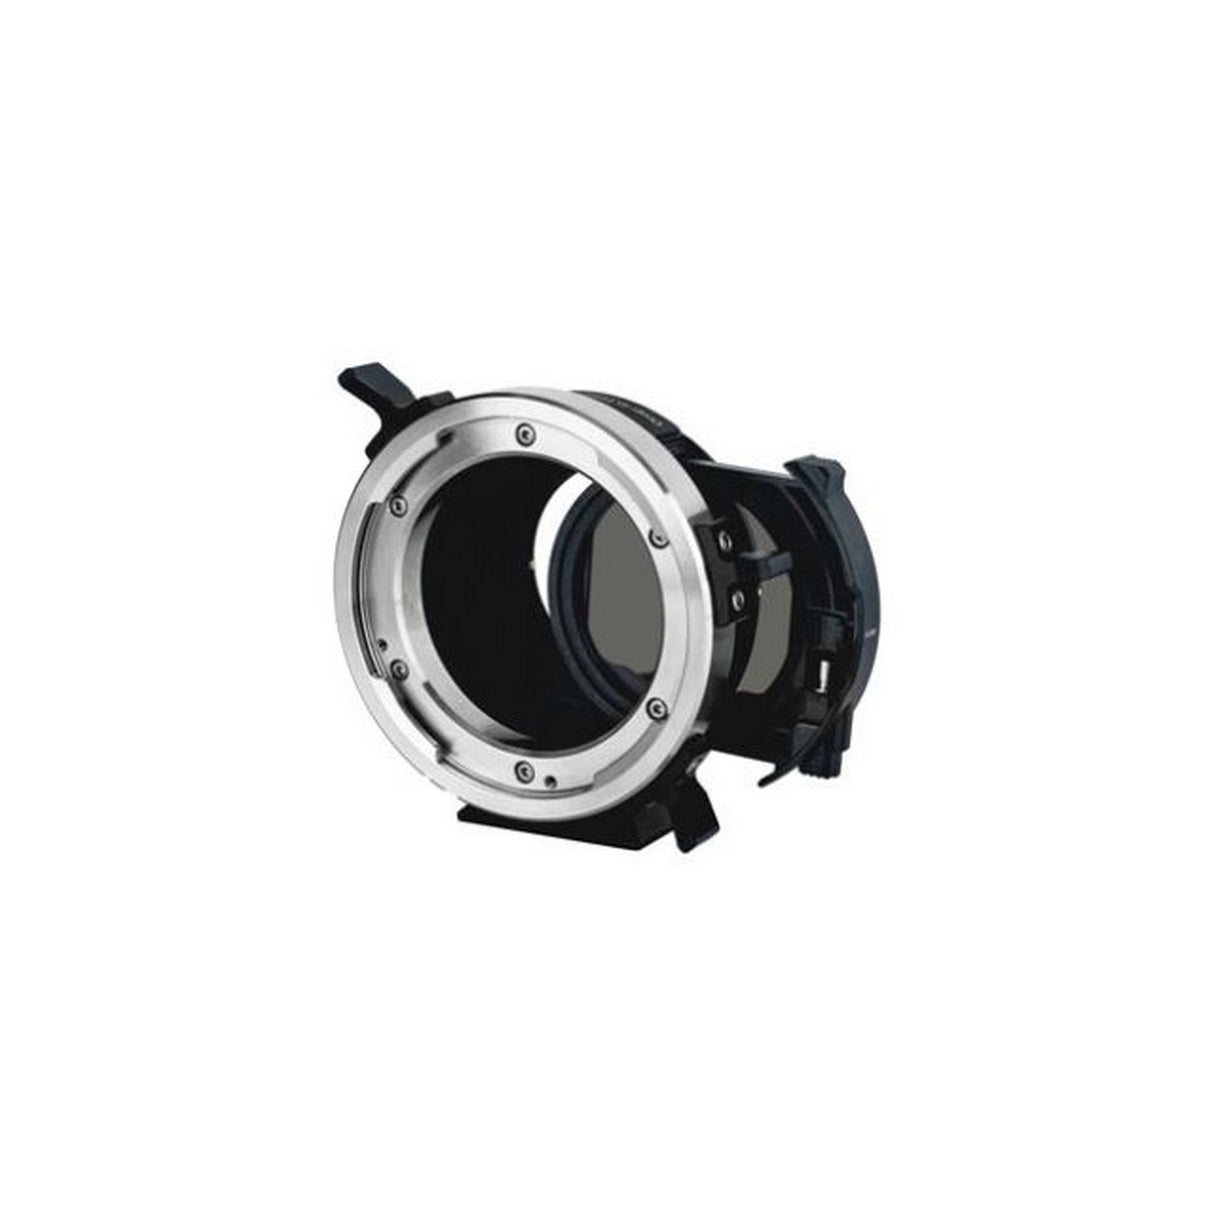 Meike Cinema PLTL-C L-Mount Camera to PL Mount Lens Adapter with Variable ND/Clear Filter